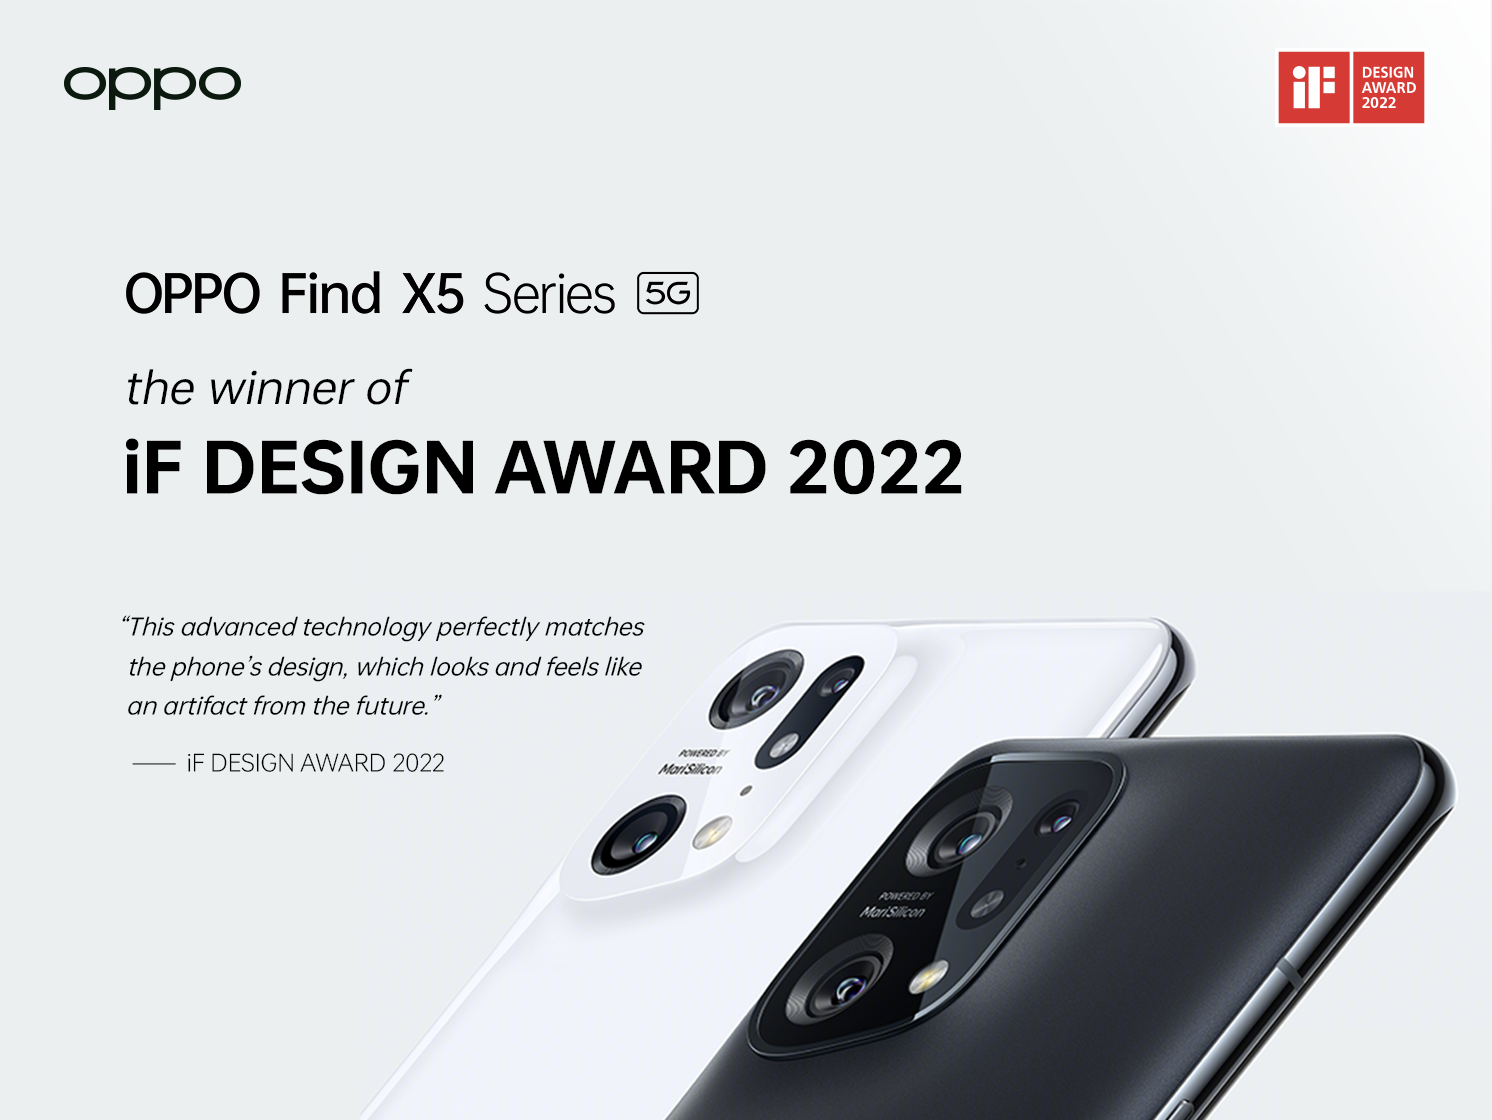 Oppo Plans to Challenge Apple Globally, Starting With 'Find X5' Premium  Smartphone - MacRumors